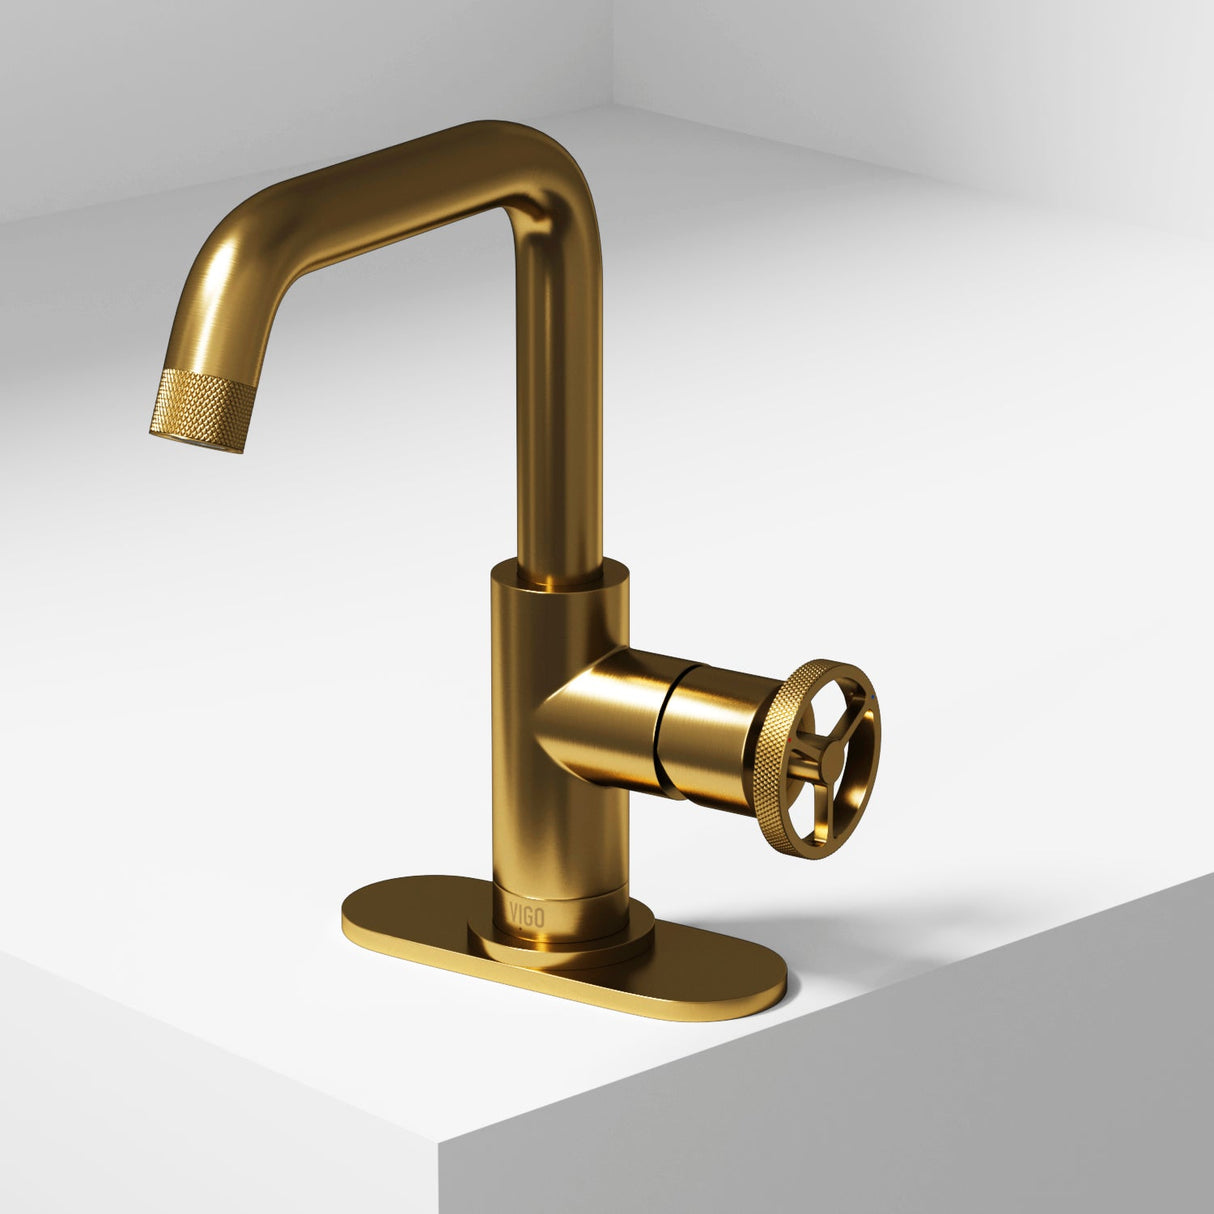 VIGO Cass Oblique Single Hole Single-Handle Bathroom Faucet with Deck Plate in Matte Brushed Gold VG01047MGK1